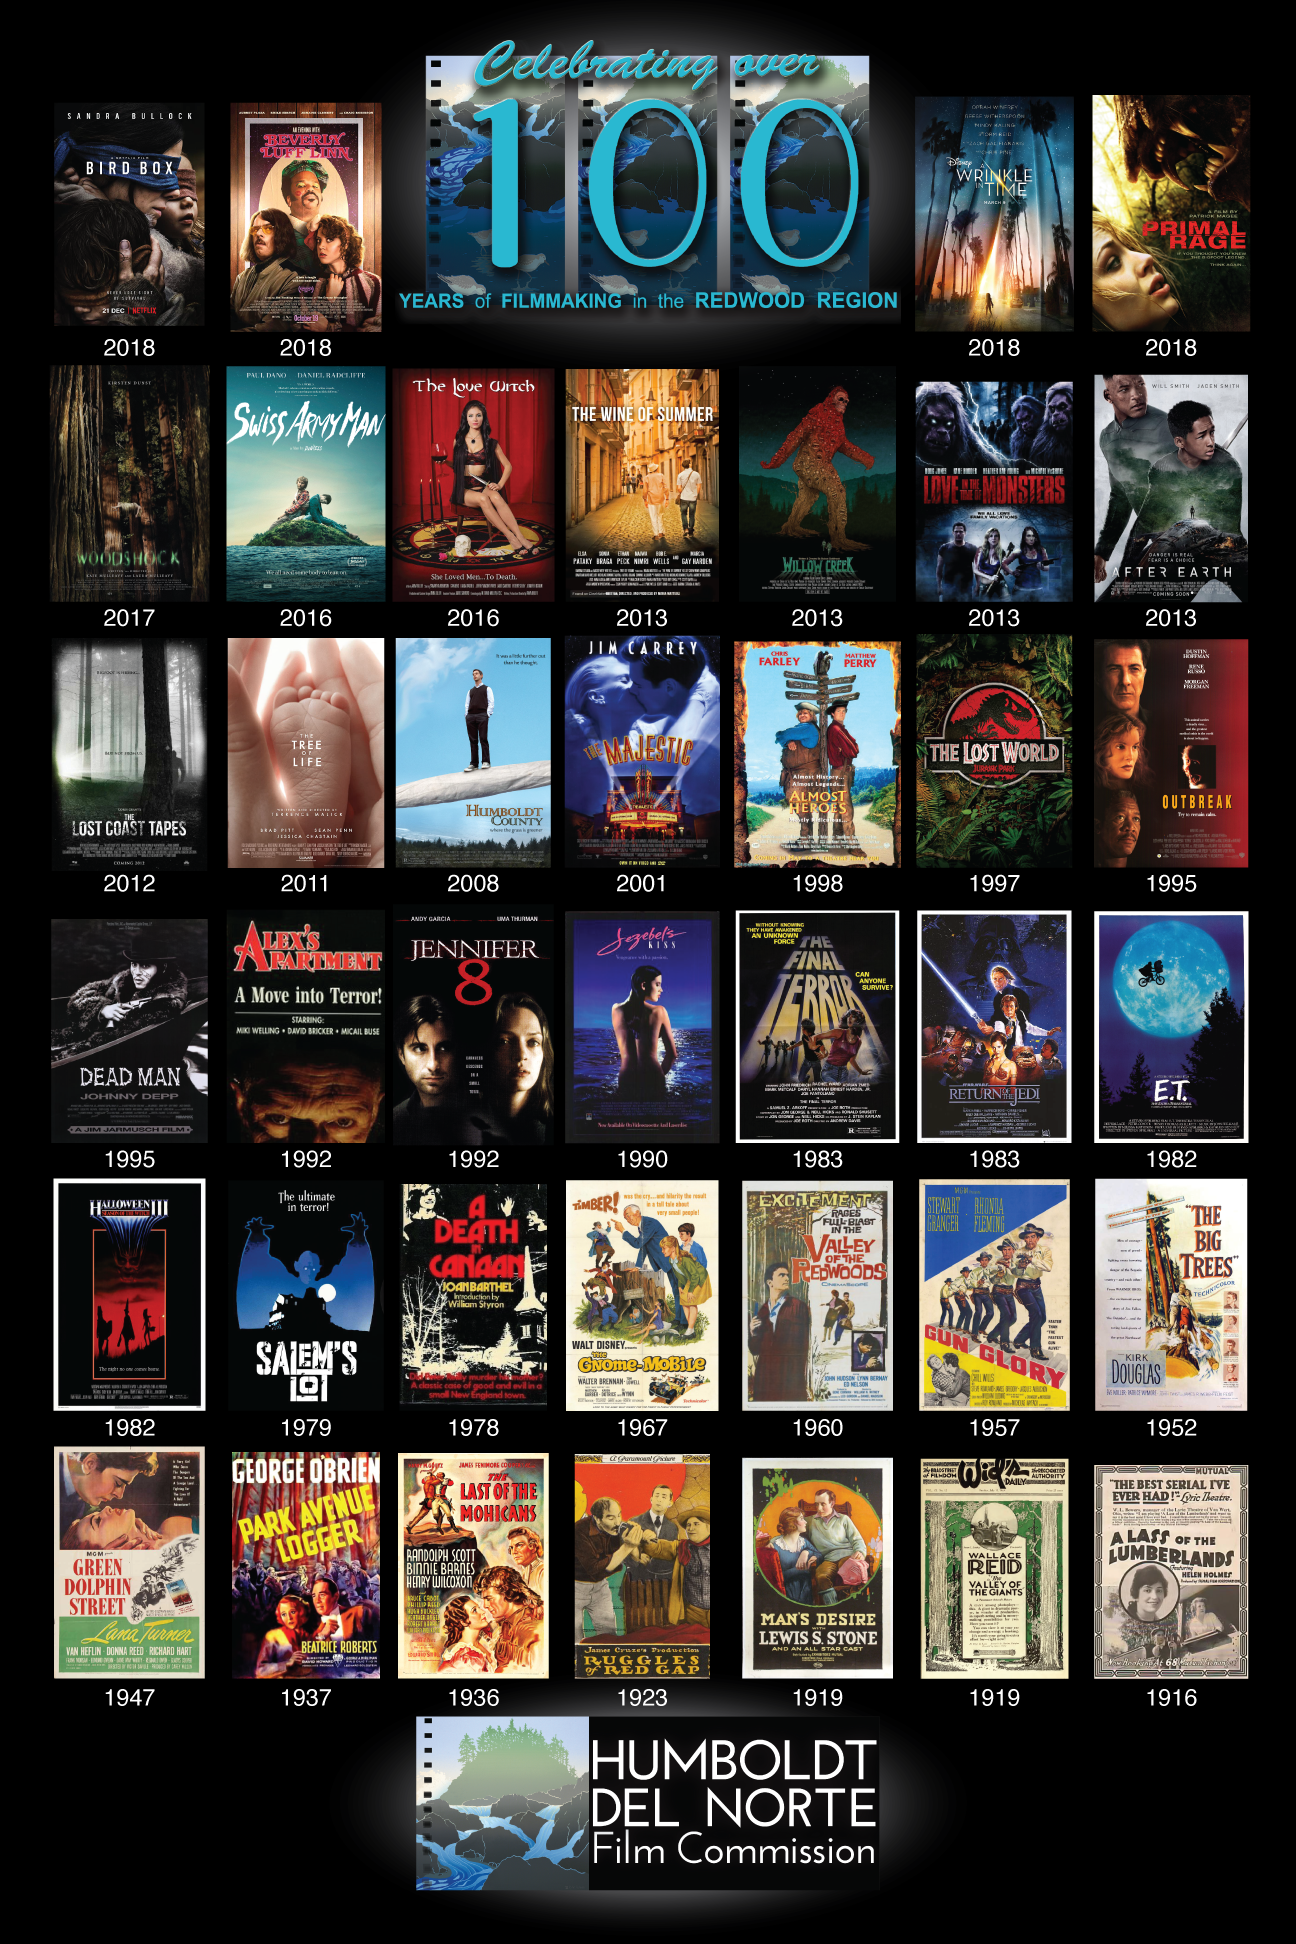 image of movie posters of Redwood region filmography